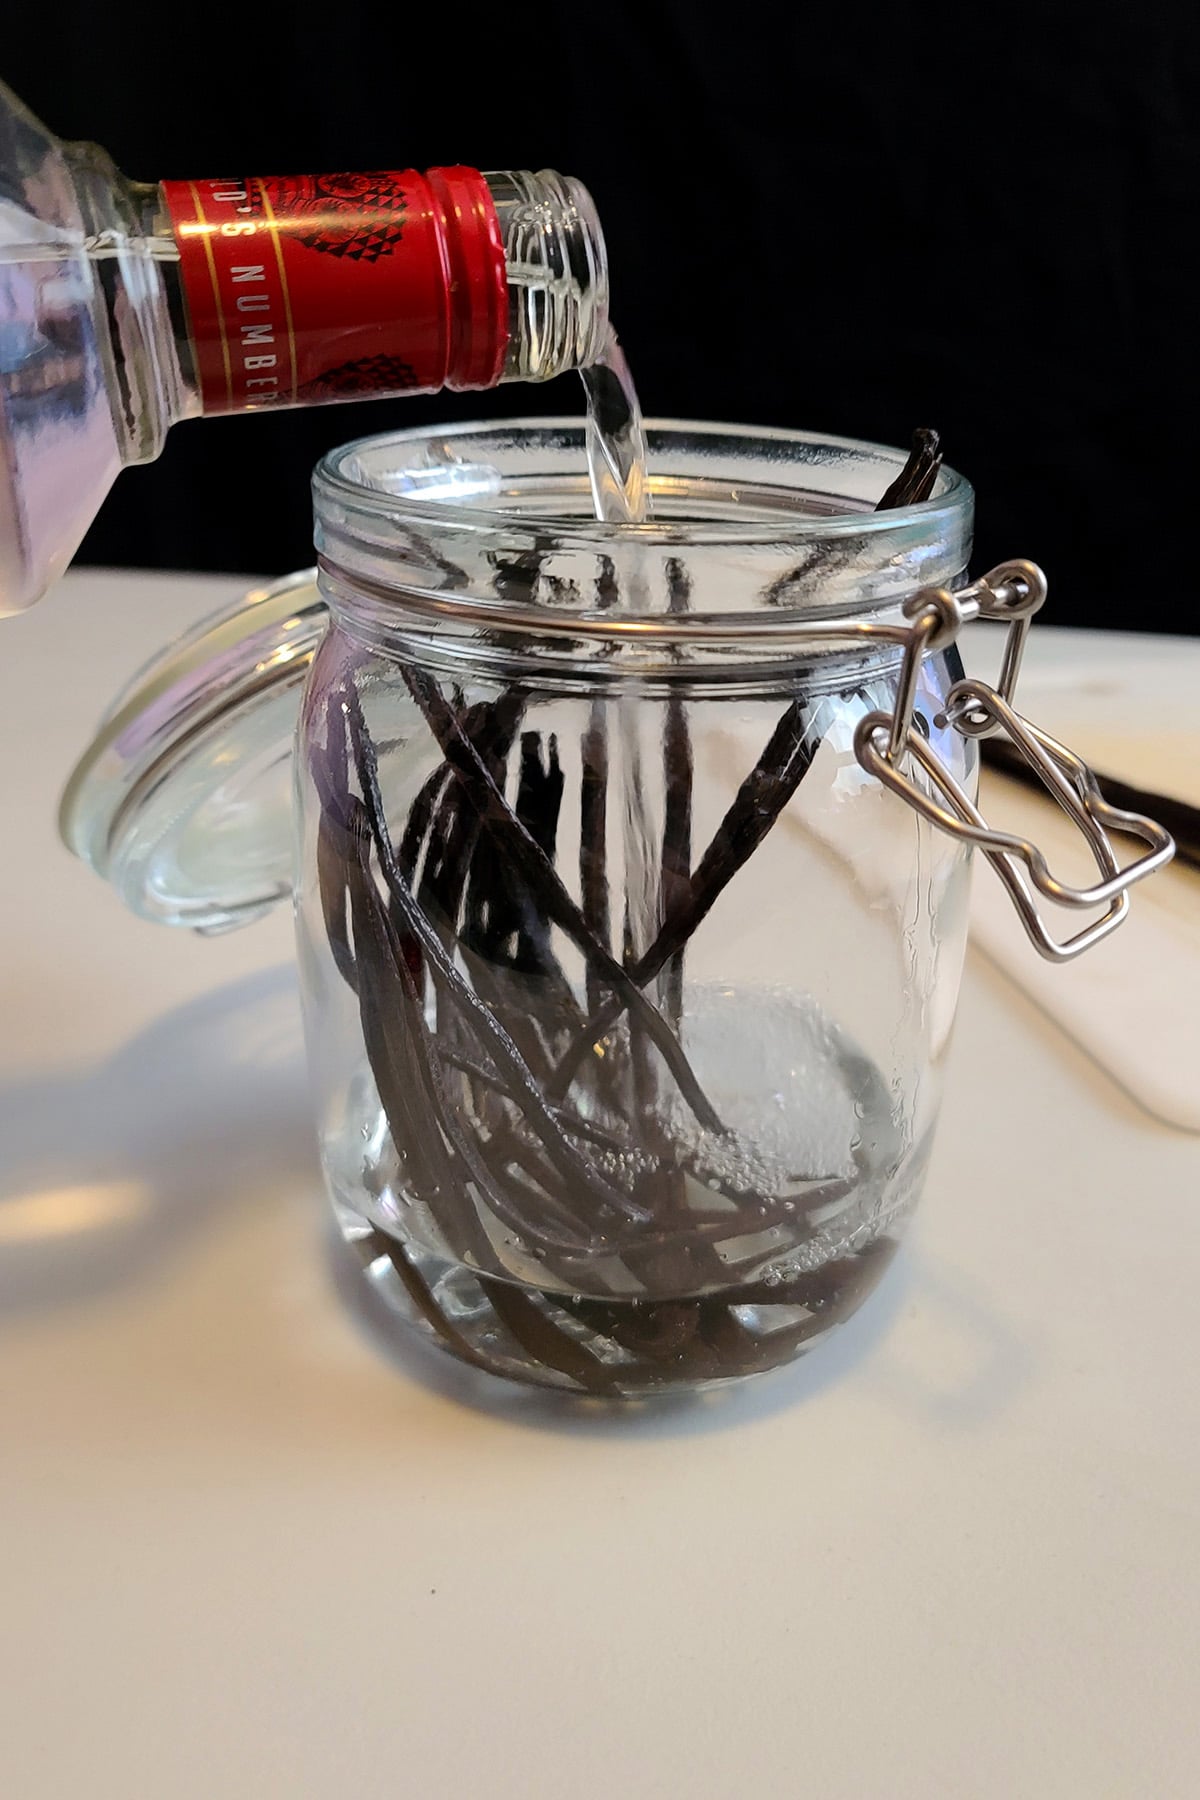 A glass jar with several split vanilla beans in it. Vodka is being poured in.